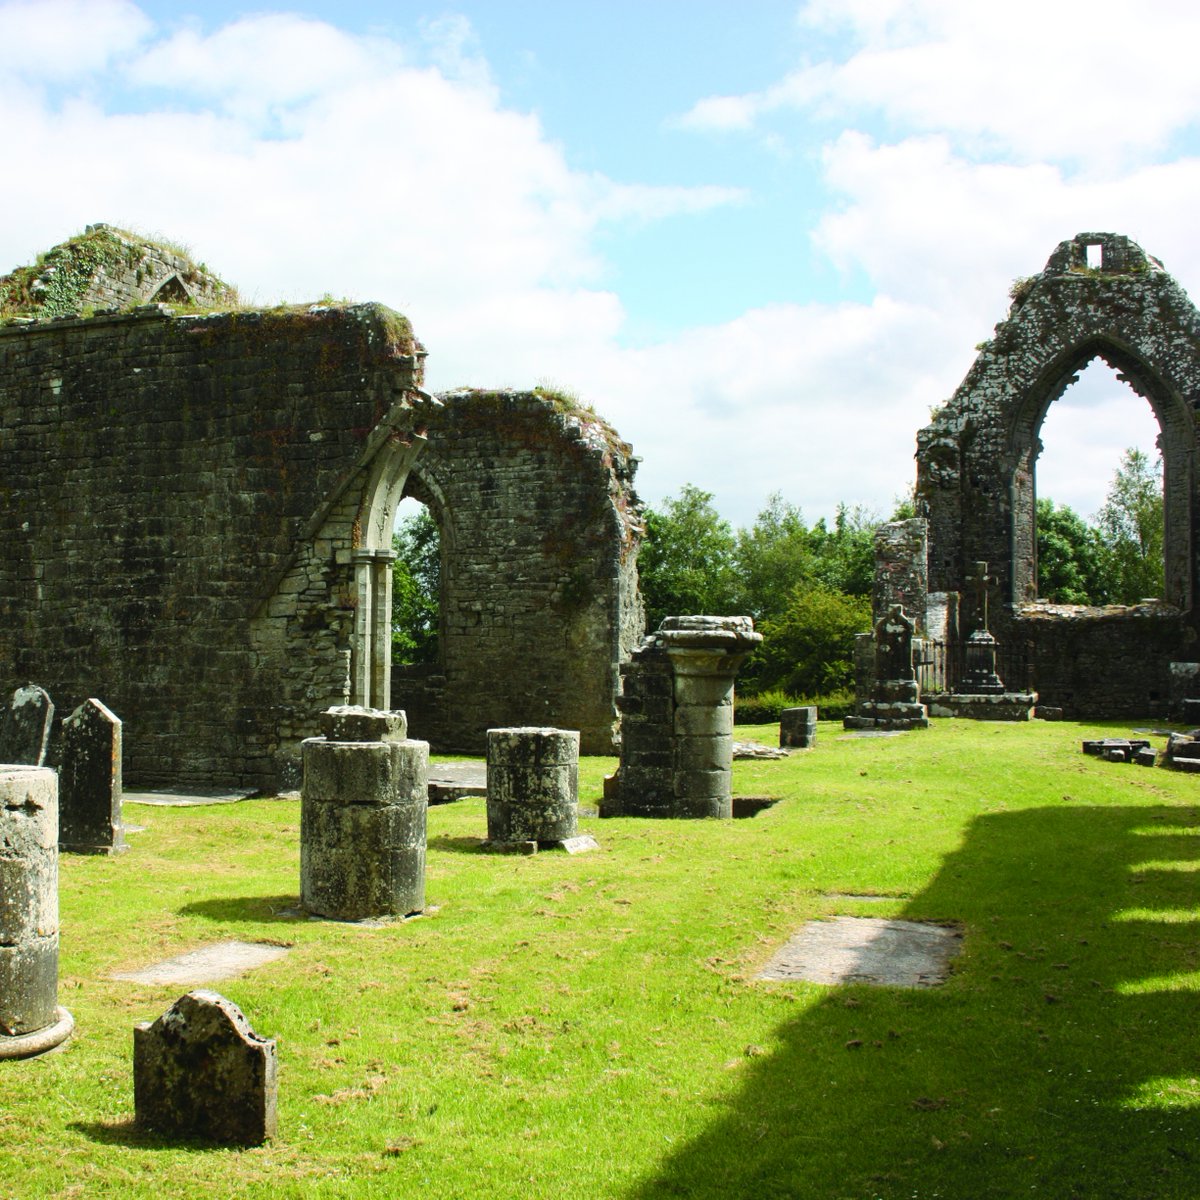 Only a stone's throw away from Gleeson's is the ruins of Roscommon Abbey🏰, a lovely attraction steeped in history!

#visitroscommon #irelandshiddenheartlands #gleesons #staycation #explore #keepdiscovering #discoversligo